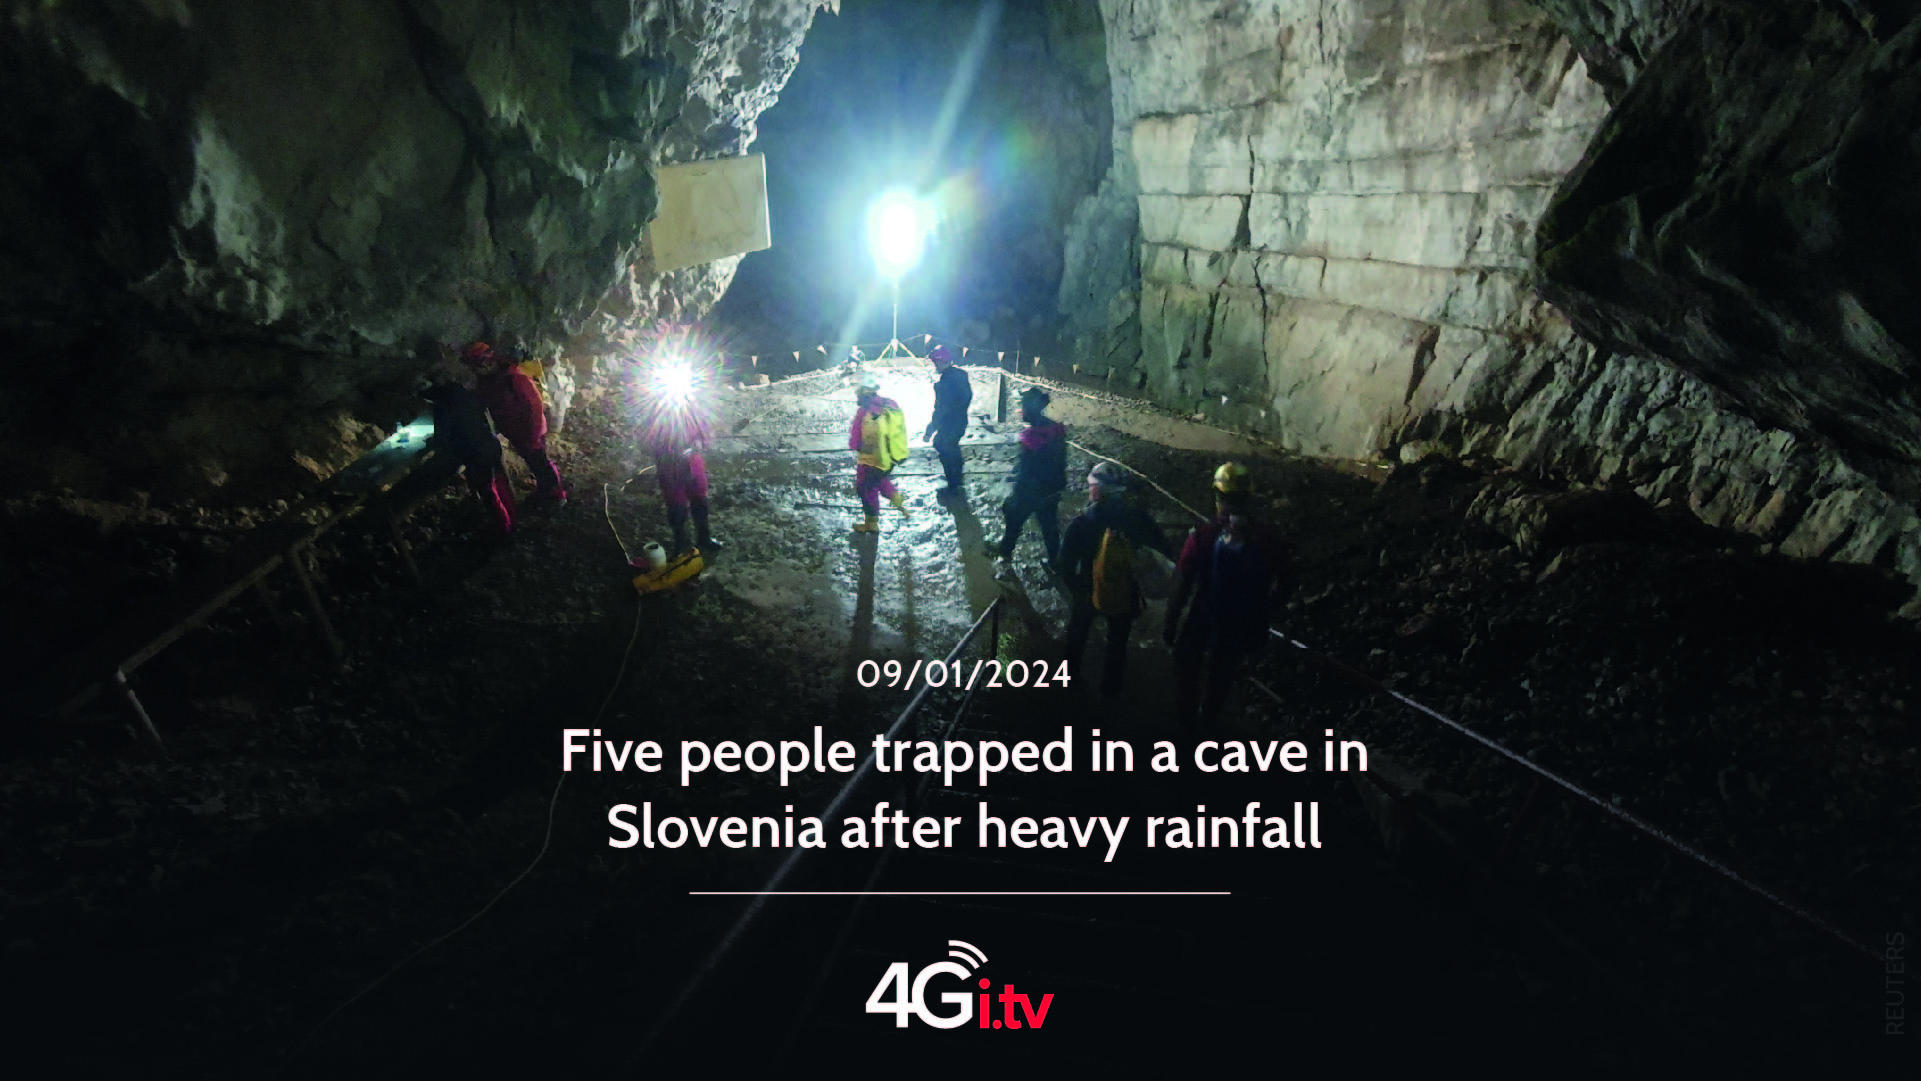 Подробнее о статье Five people trapped in a cave in Slovenia after heavy rainfall